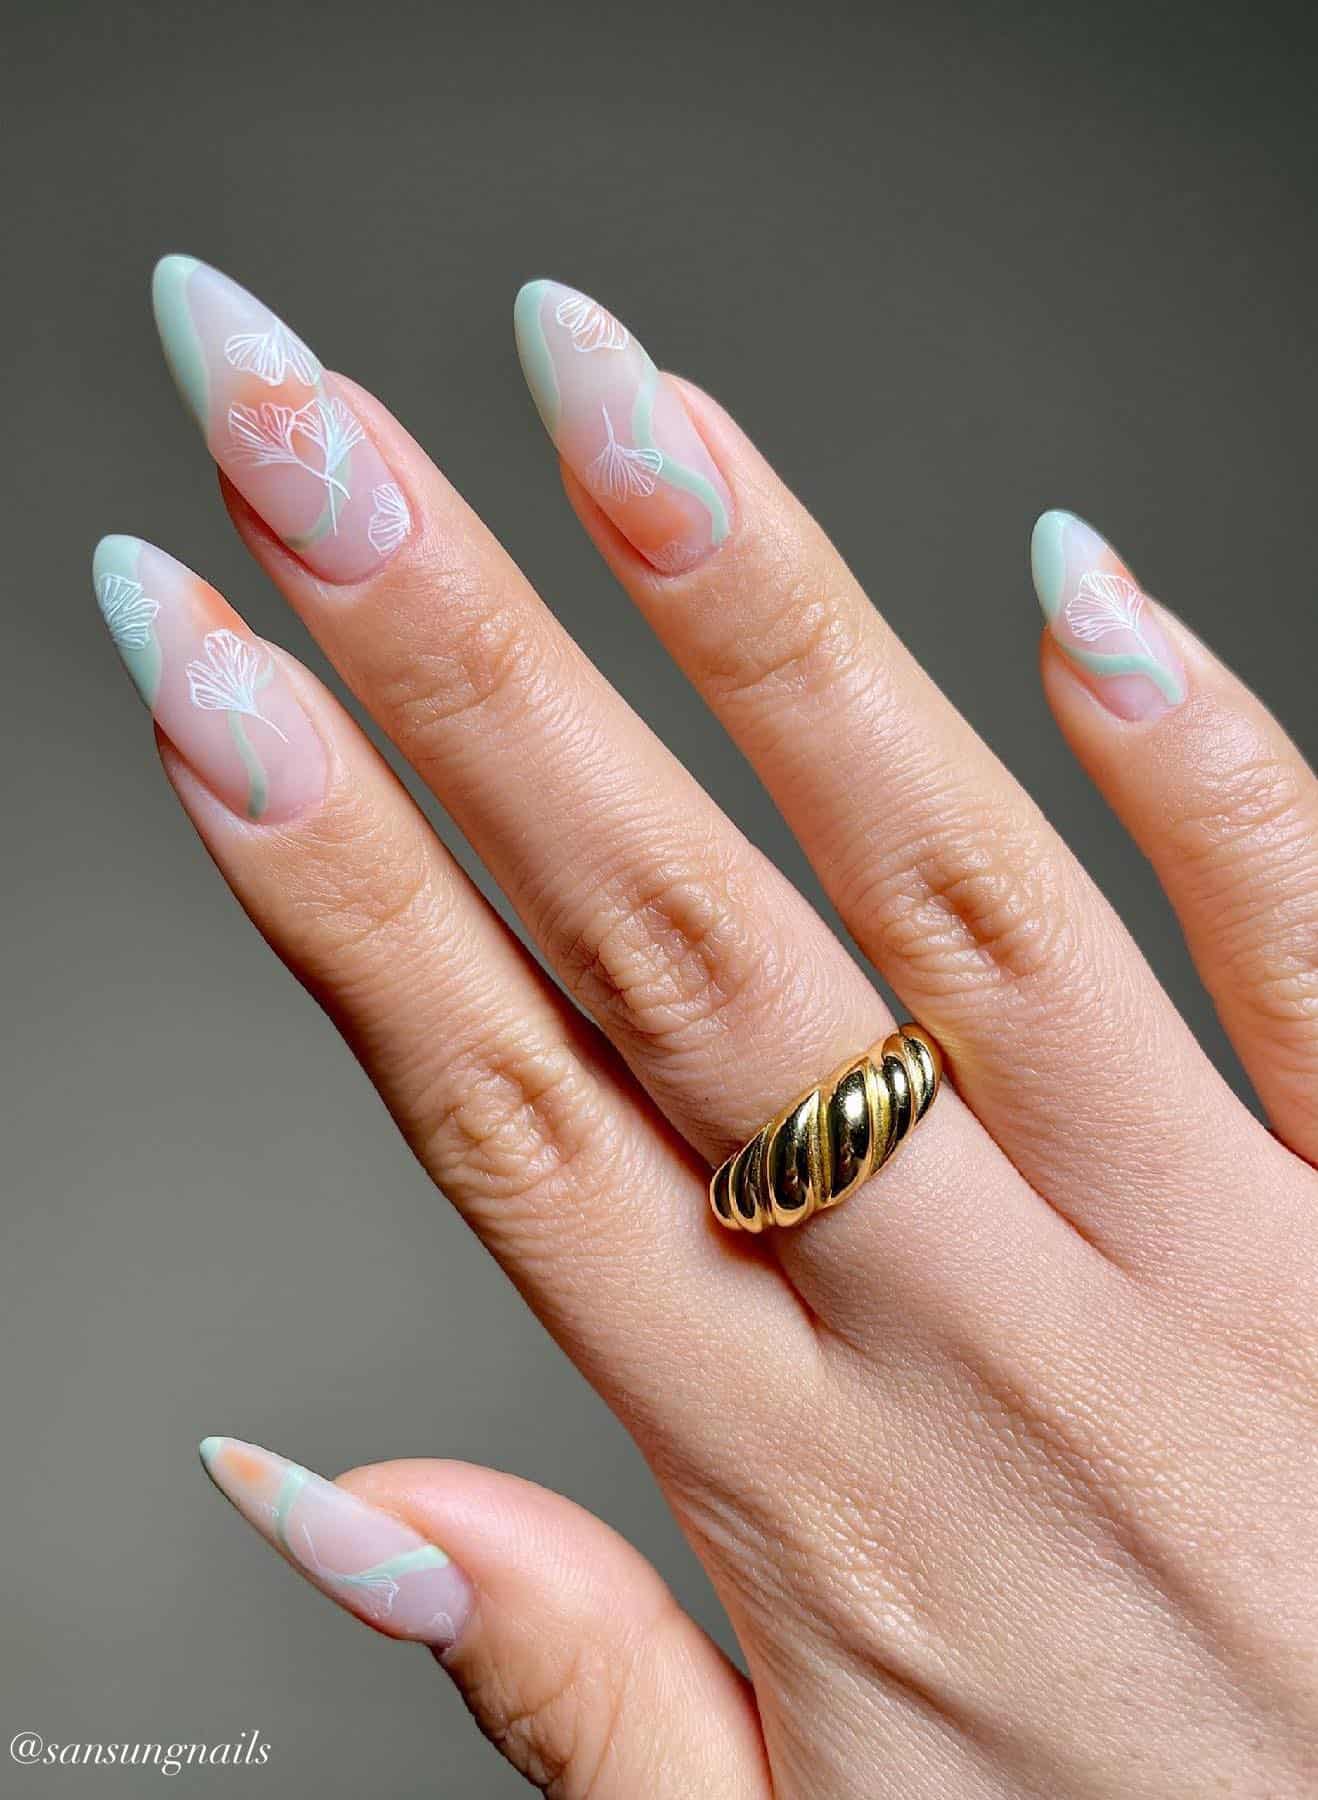 A hand with matte nude nails painted with matte mint green asymmetrical French tips and wave accents with white floral nail art